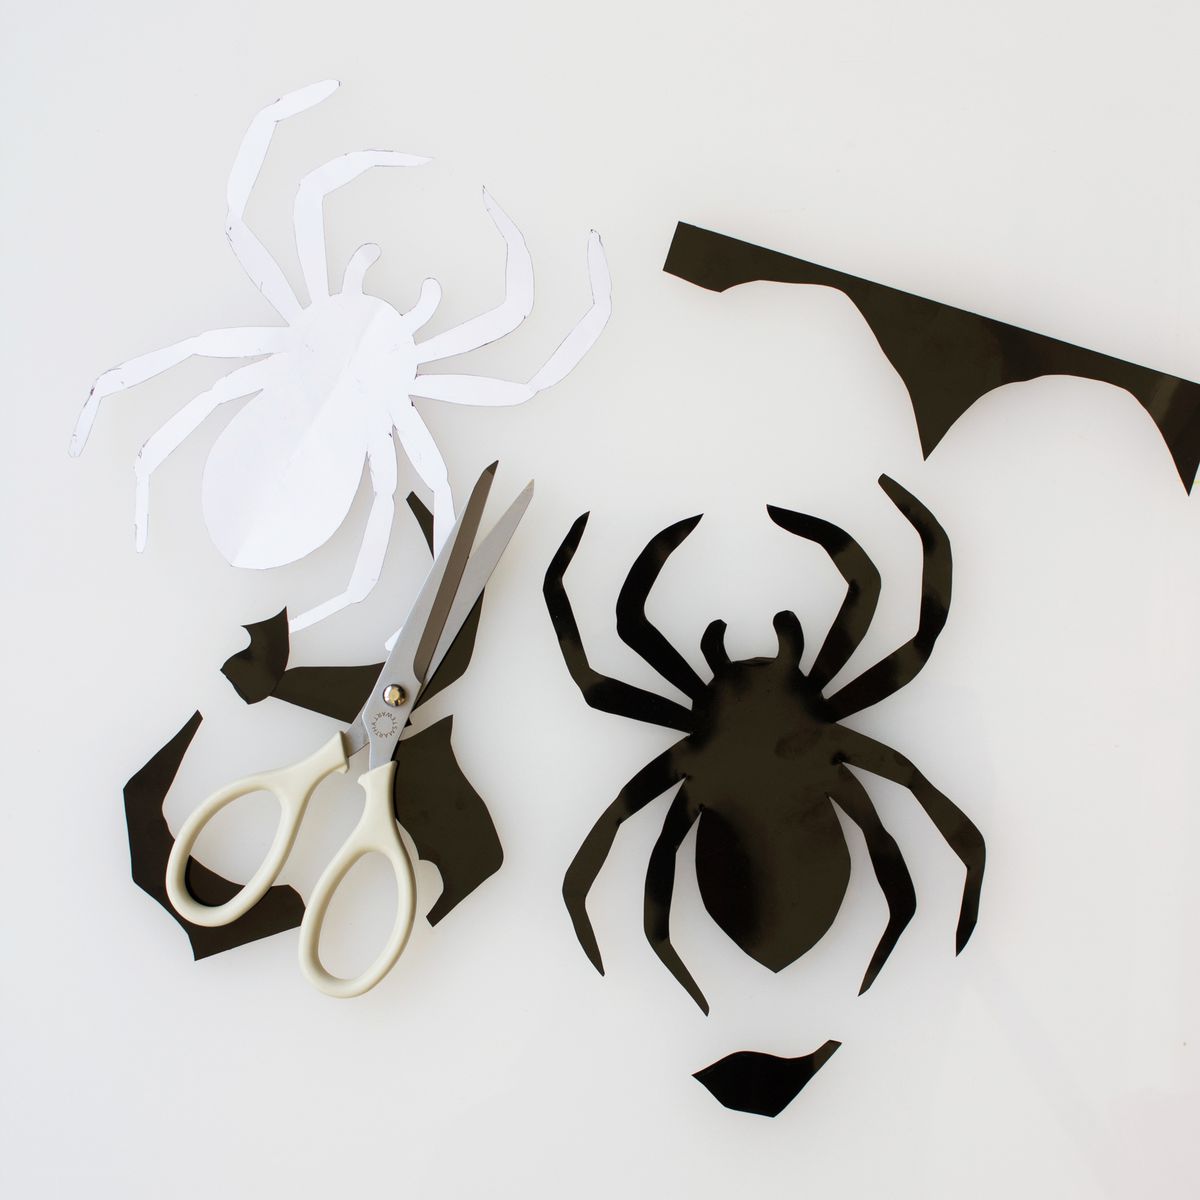 TRACE AND CUT OUT EACH SPIDER